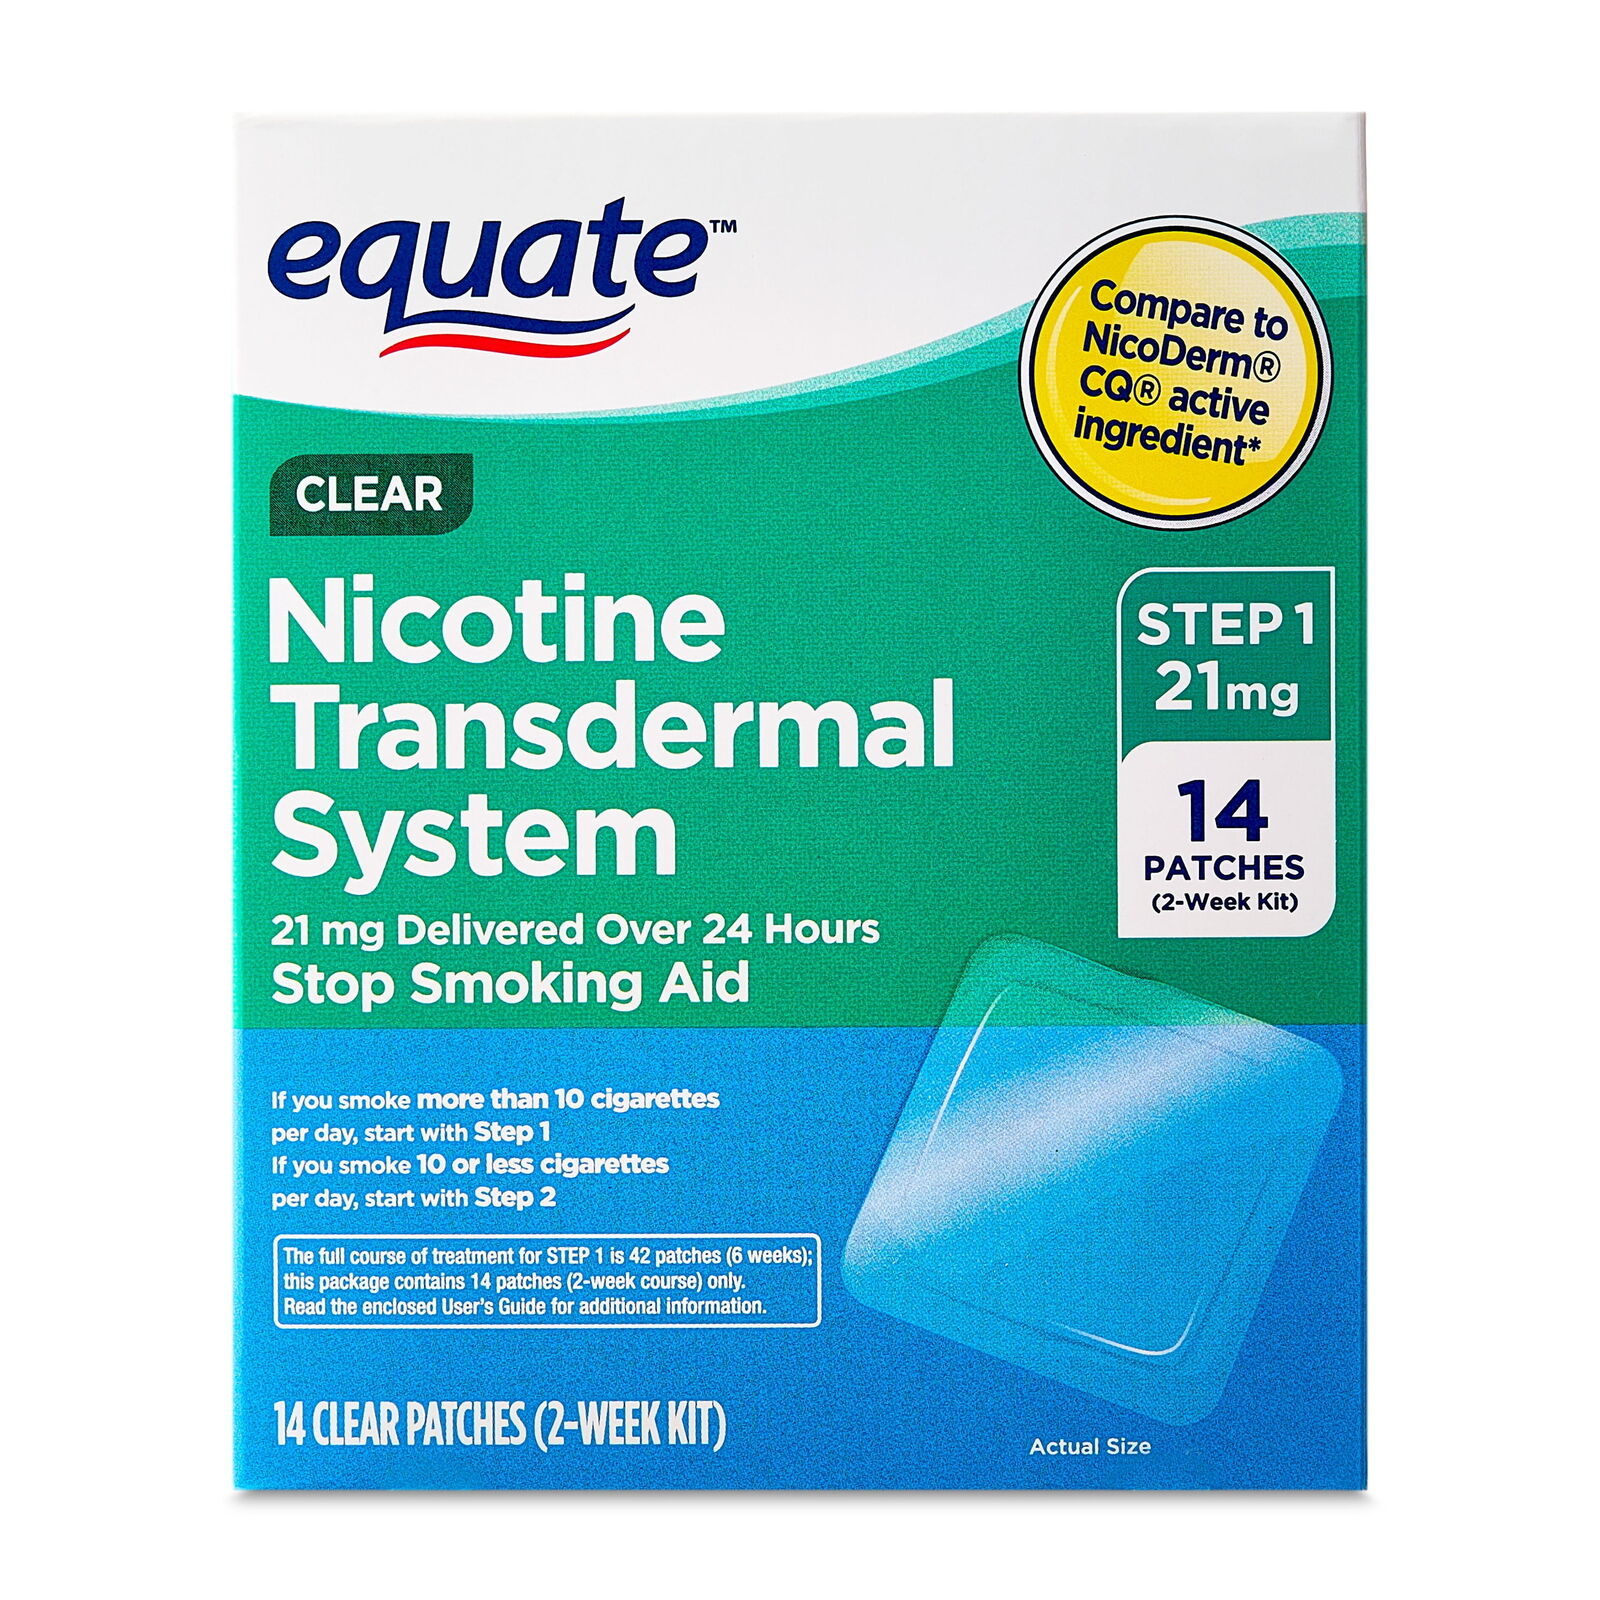 Equate Nicotine Transdermal System Step 1 Clear Patches, 21 mg, 14 Count new